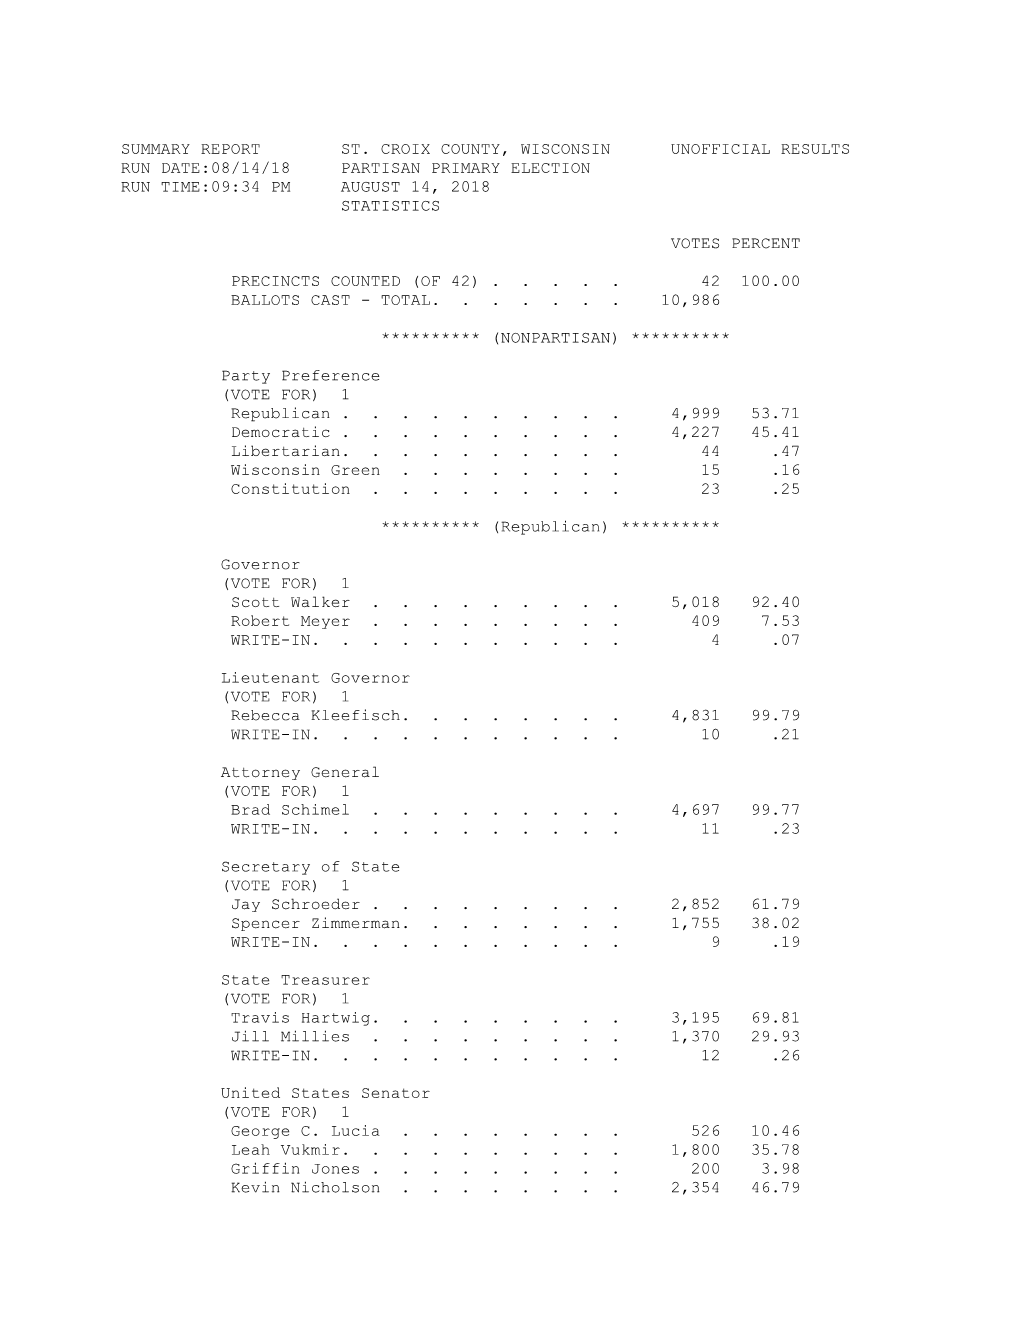 Summary Report St. Croix County, Wisconsin Unofficial Results Run Date:08/14/18 Partisan Primary Election Run Time:09:34 Pm August 14, 2018 Statistics